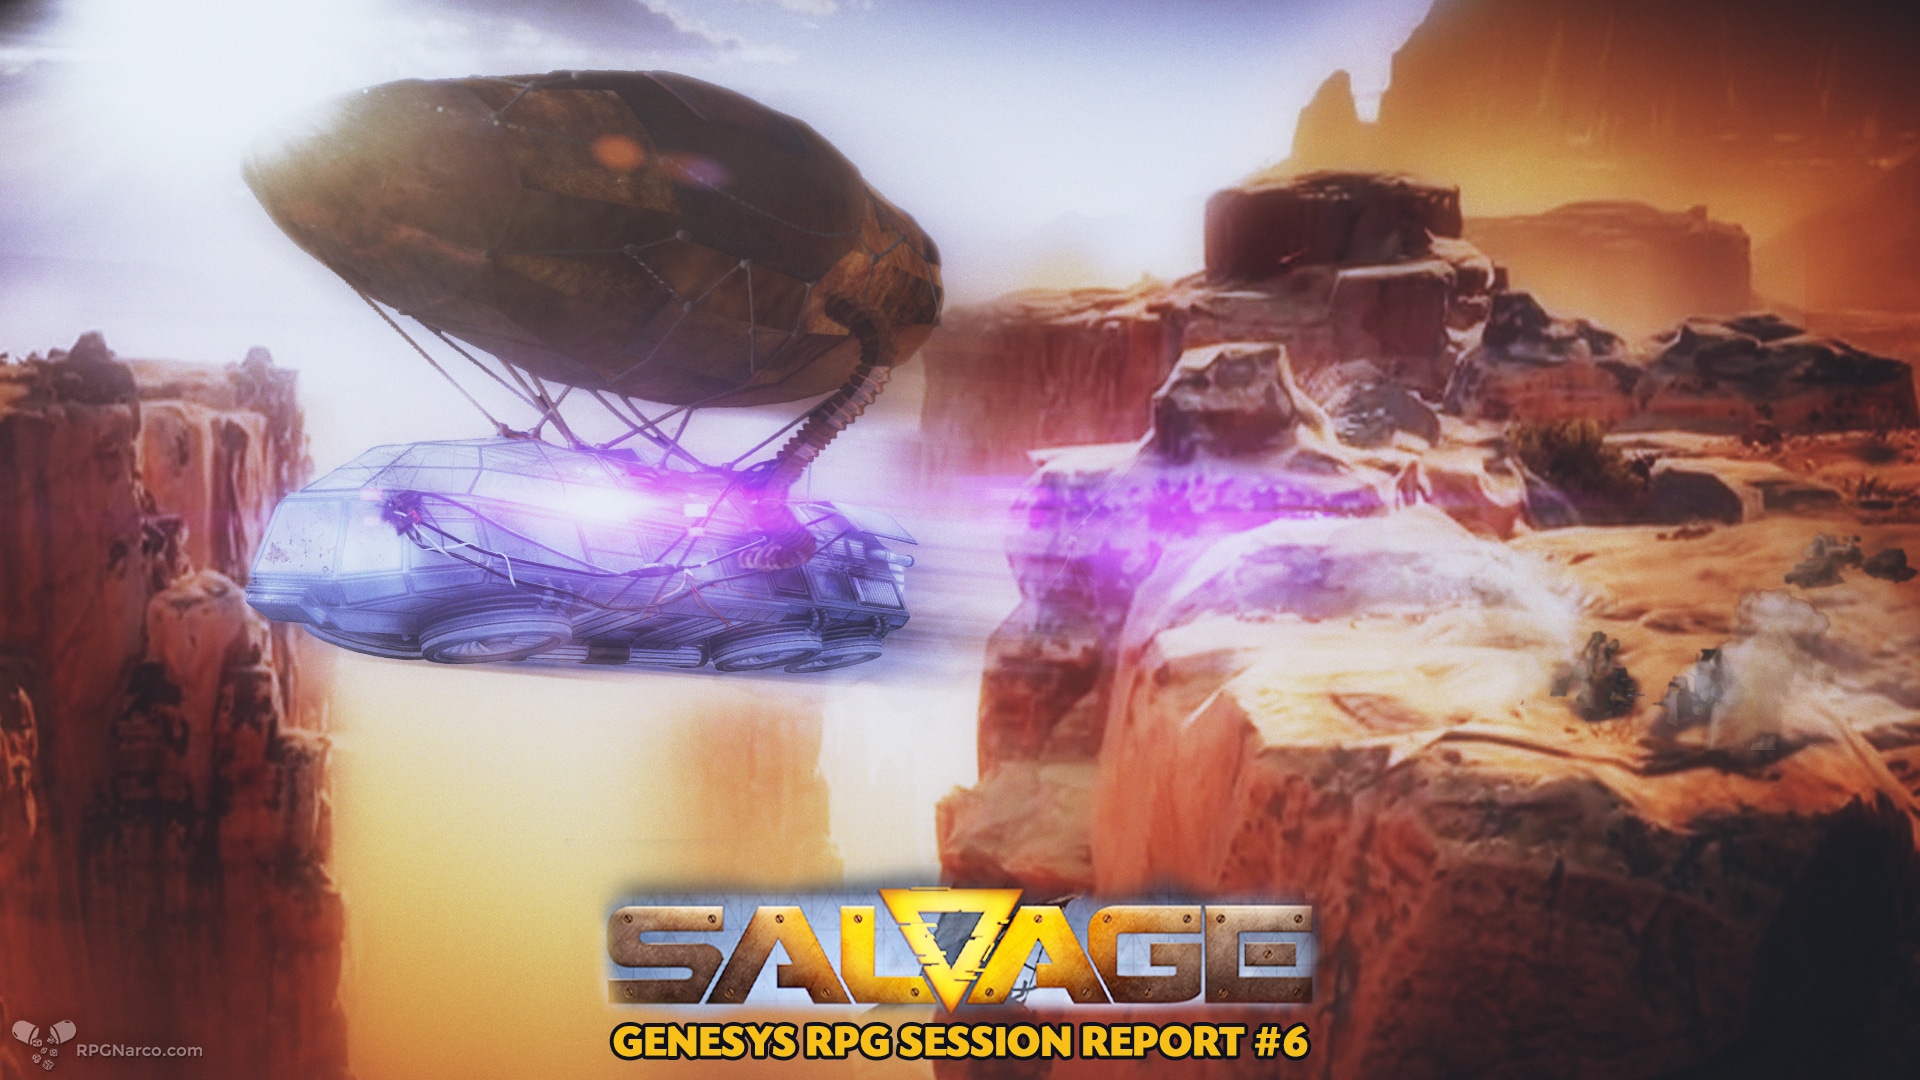 Genesys RPG Session Report – Salvage, Session 6